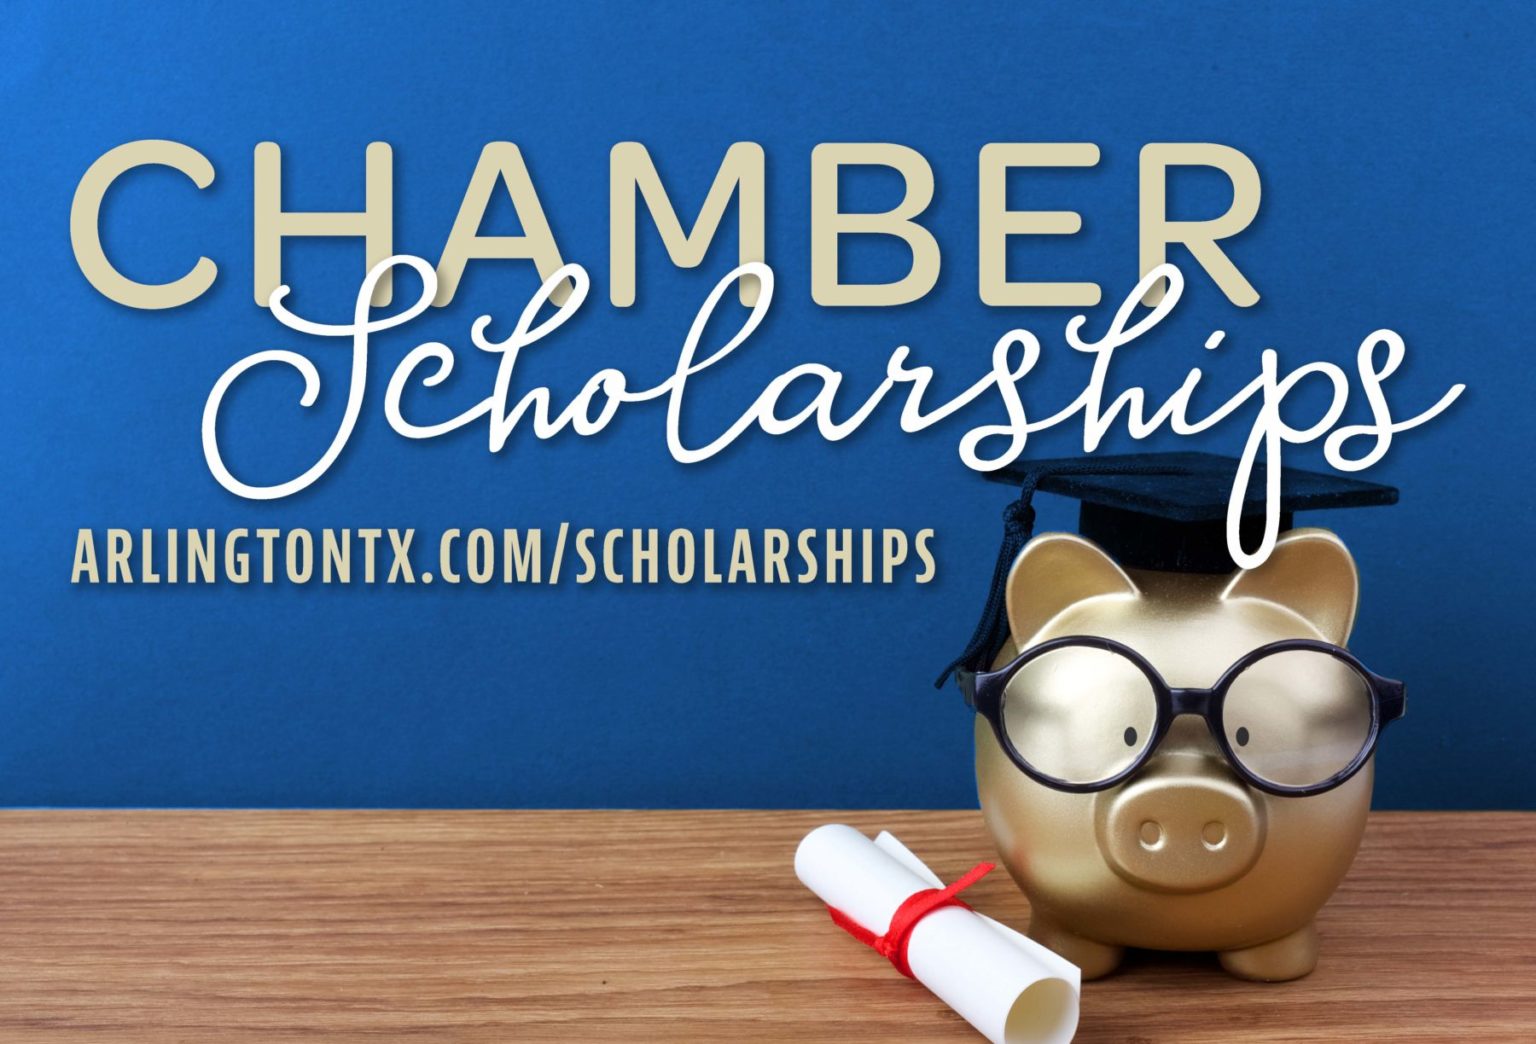 The Chamber is Giving out 27 College Scholarships Totaling more than